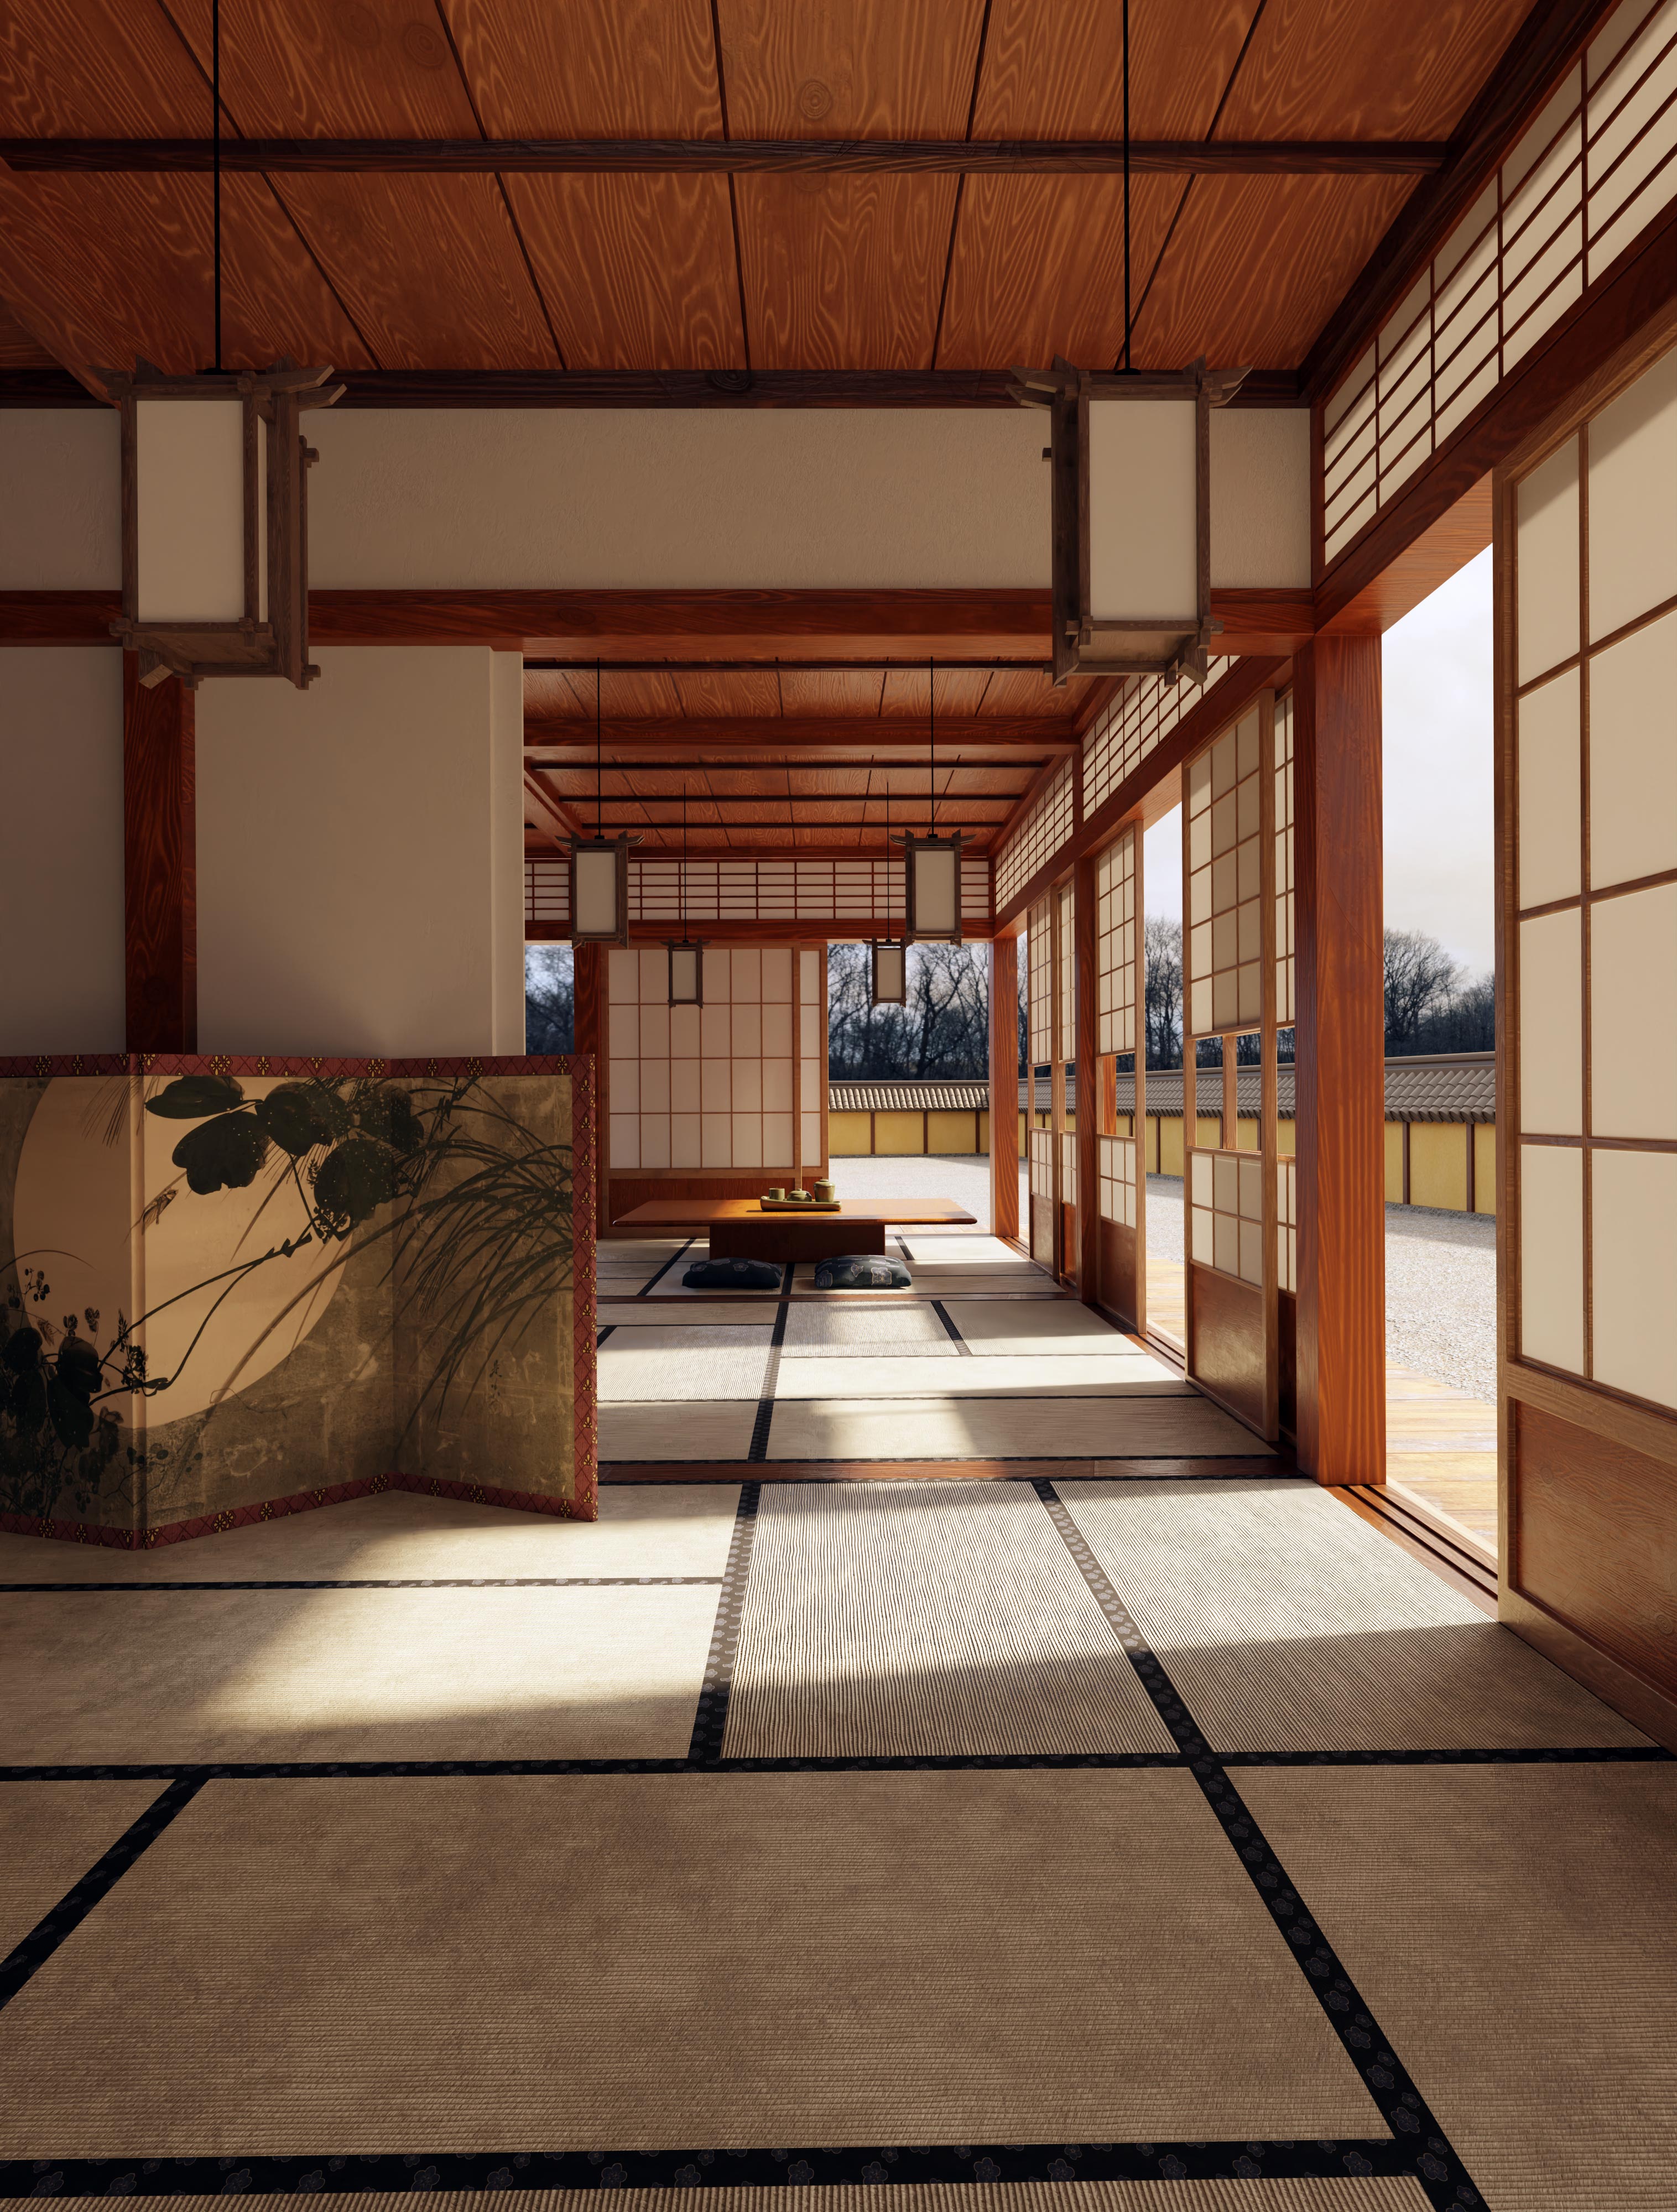 Japanese Zen interior - Finished Projects - Blender Artists Community